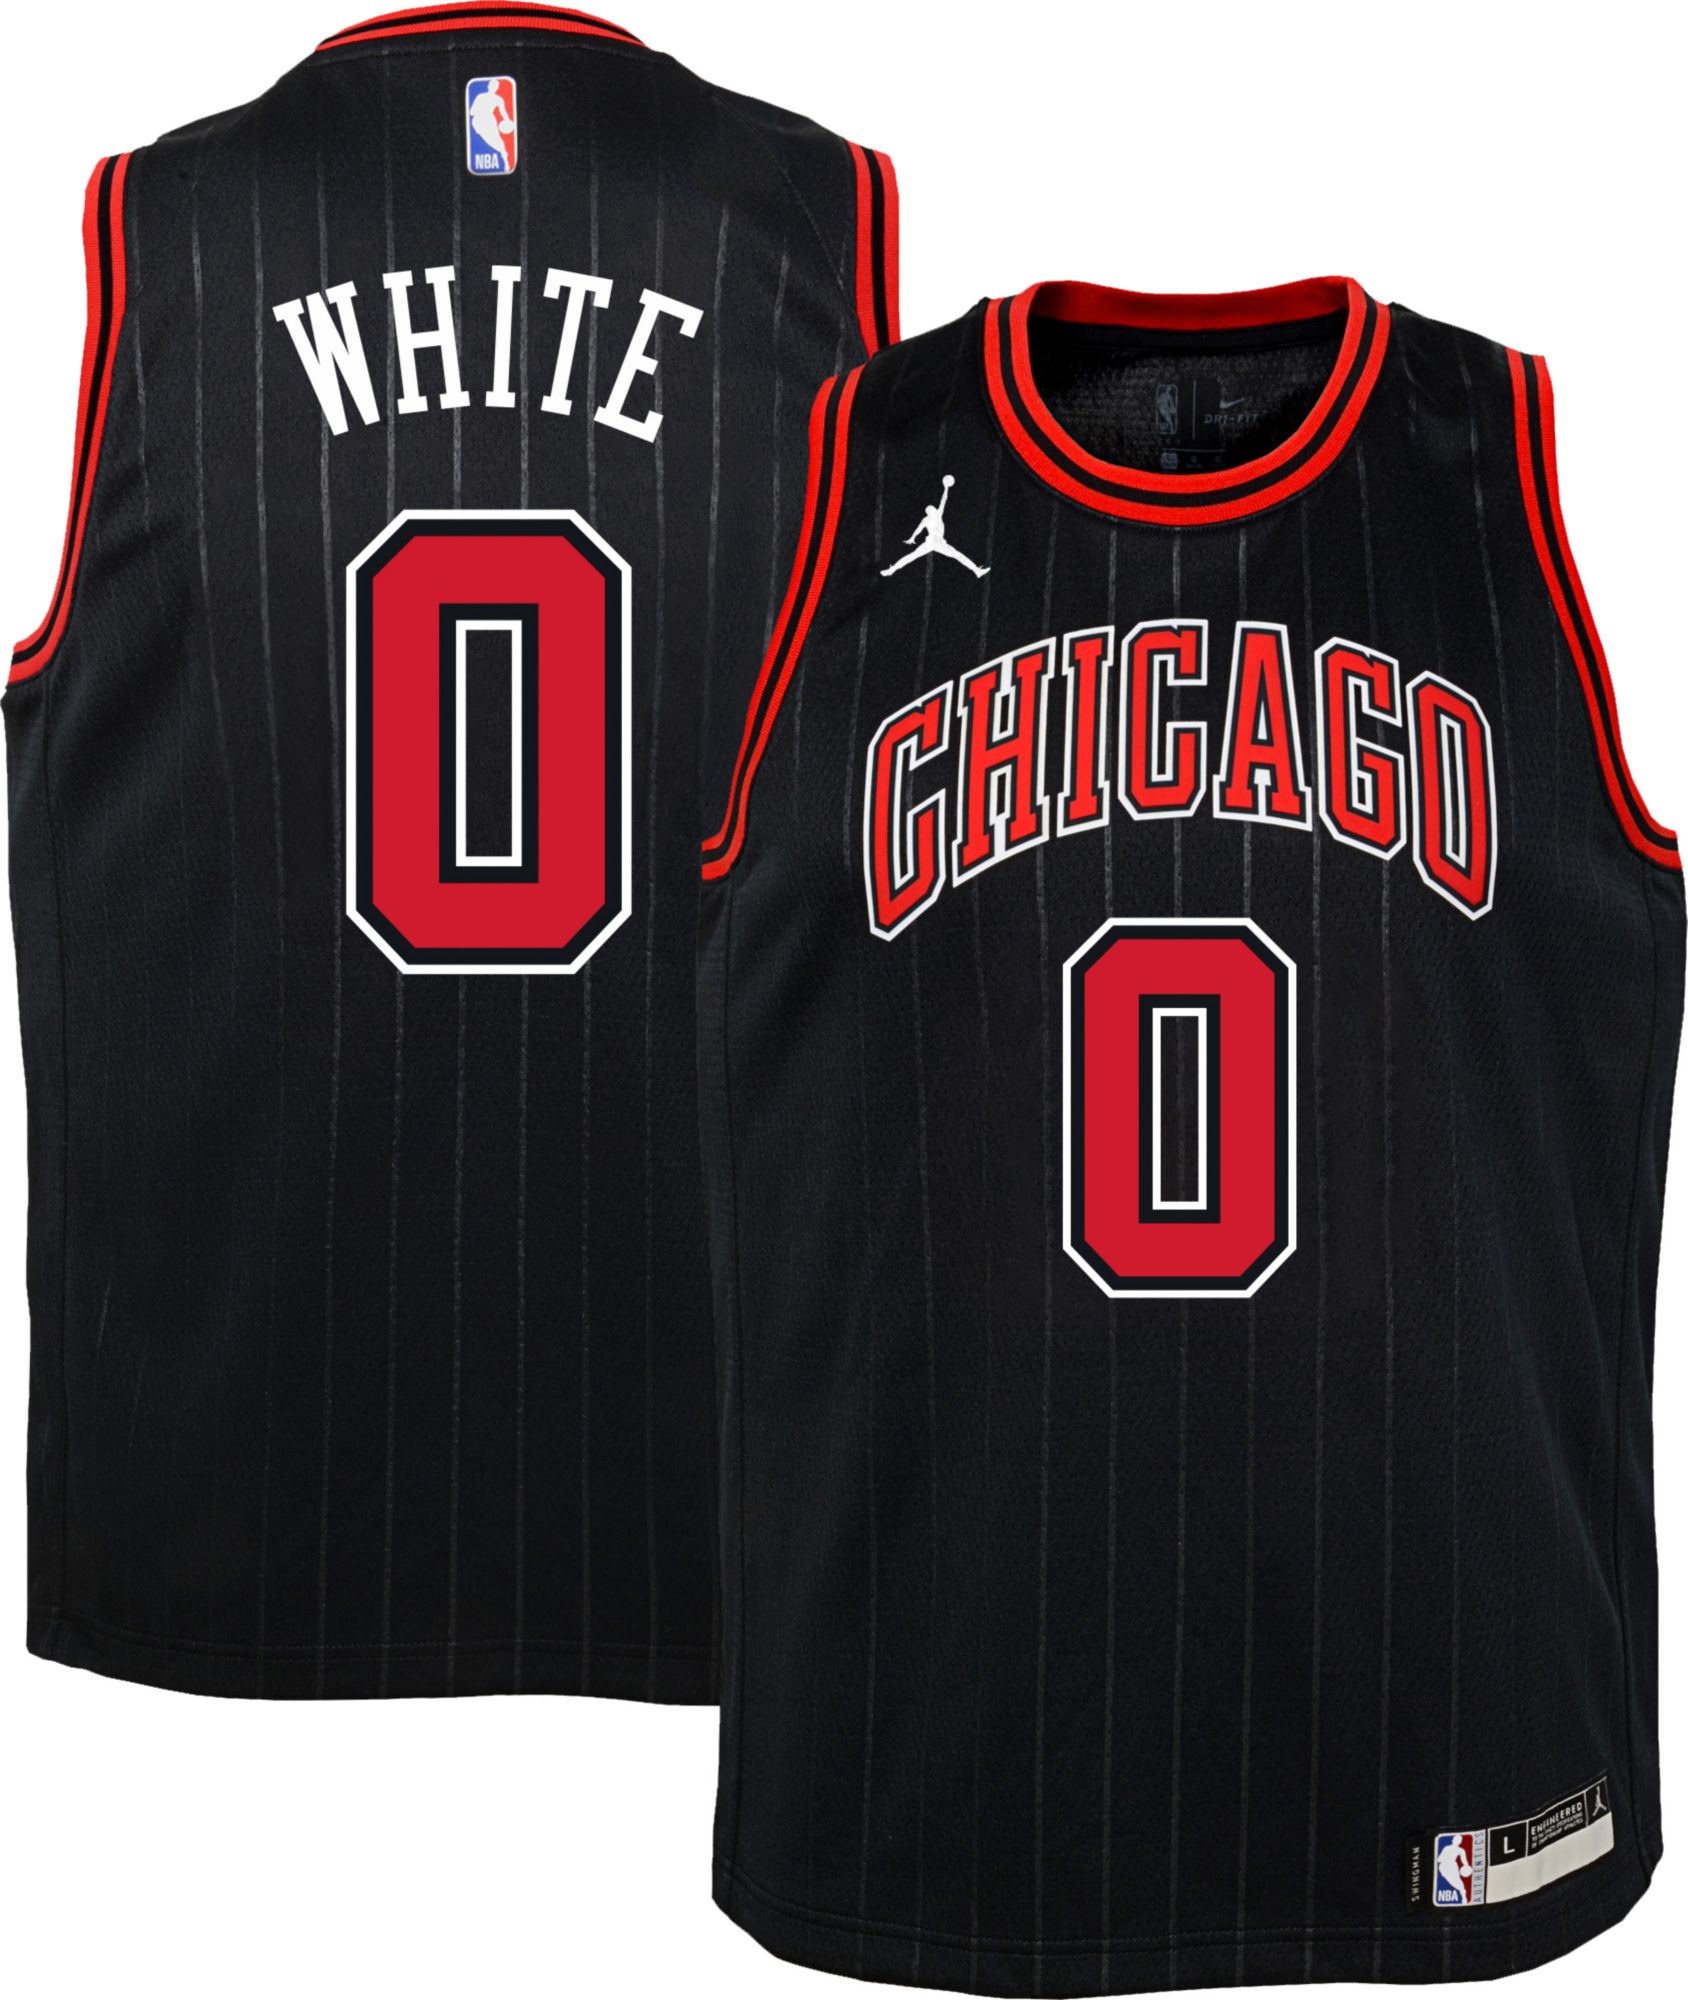 coby white nike jersey